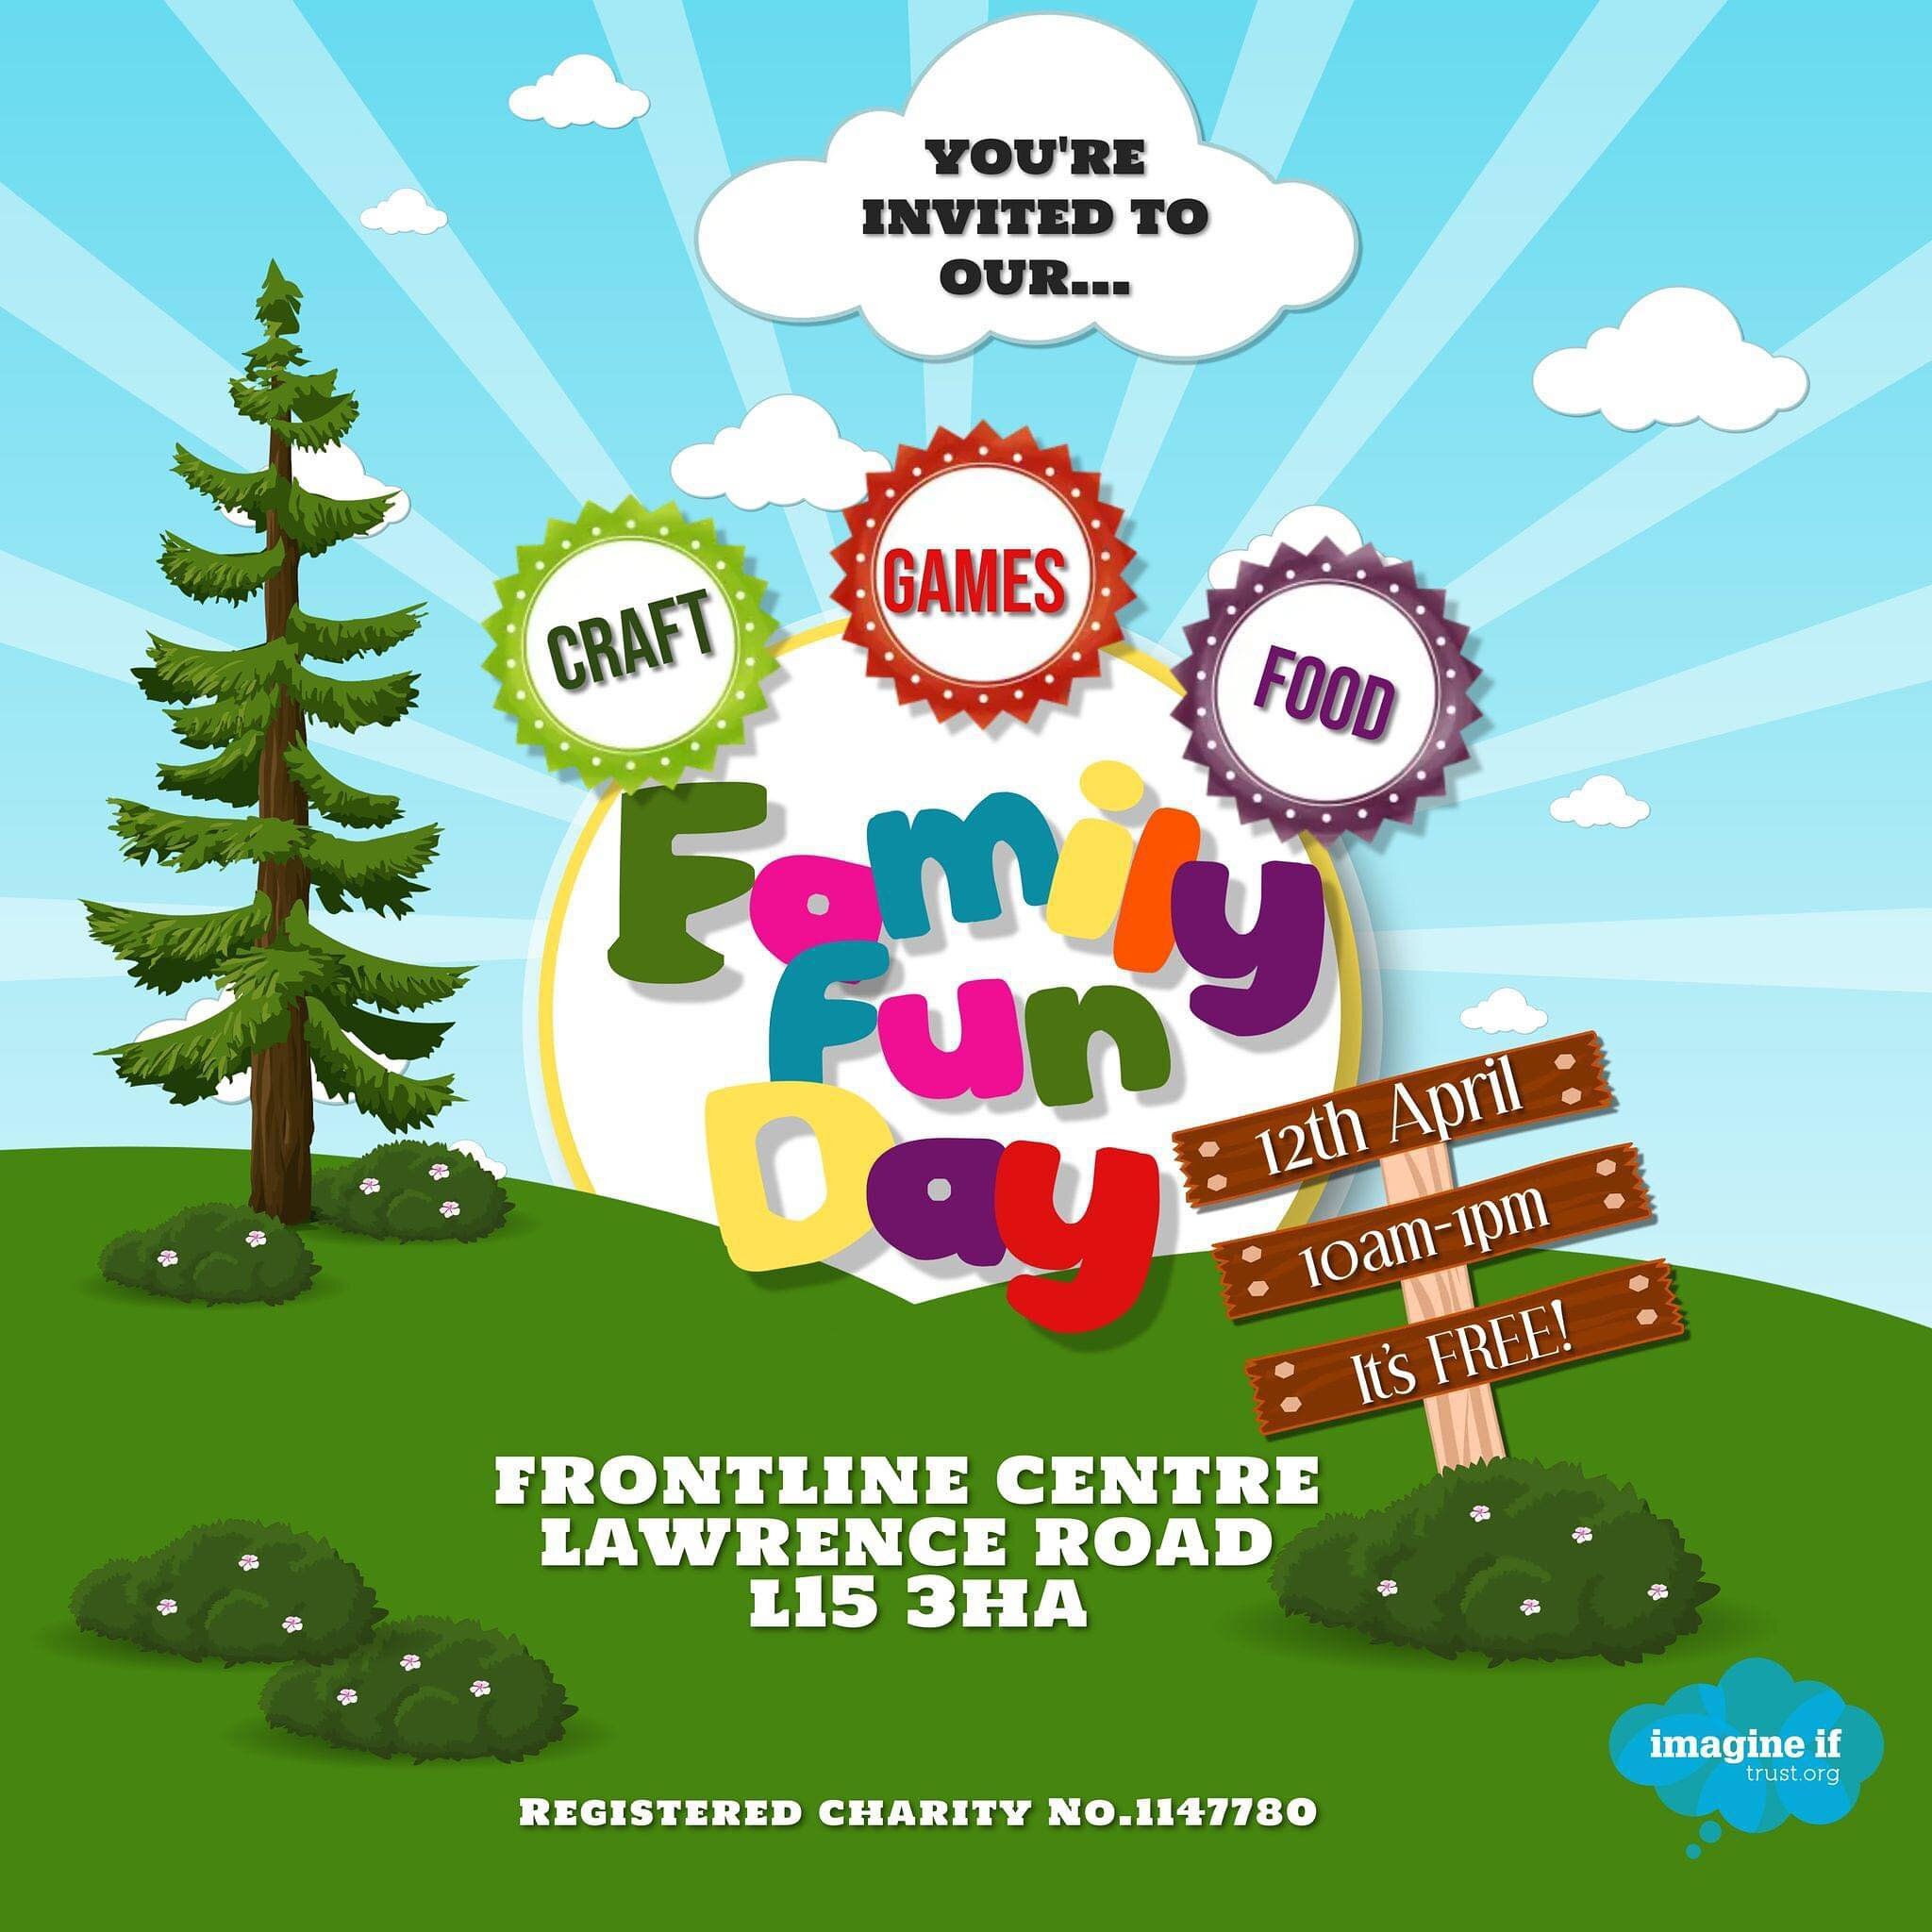 Join us on Friday 12th April for a morning of fun, games, craft and food. We&rsquo;ll have a number of bouncy castles too! 

It&rsquo;s free to attend and we&rsquo;ll provide a free lunch for all the children. There will be refreshments available for